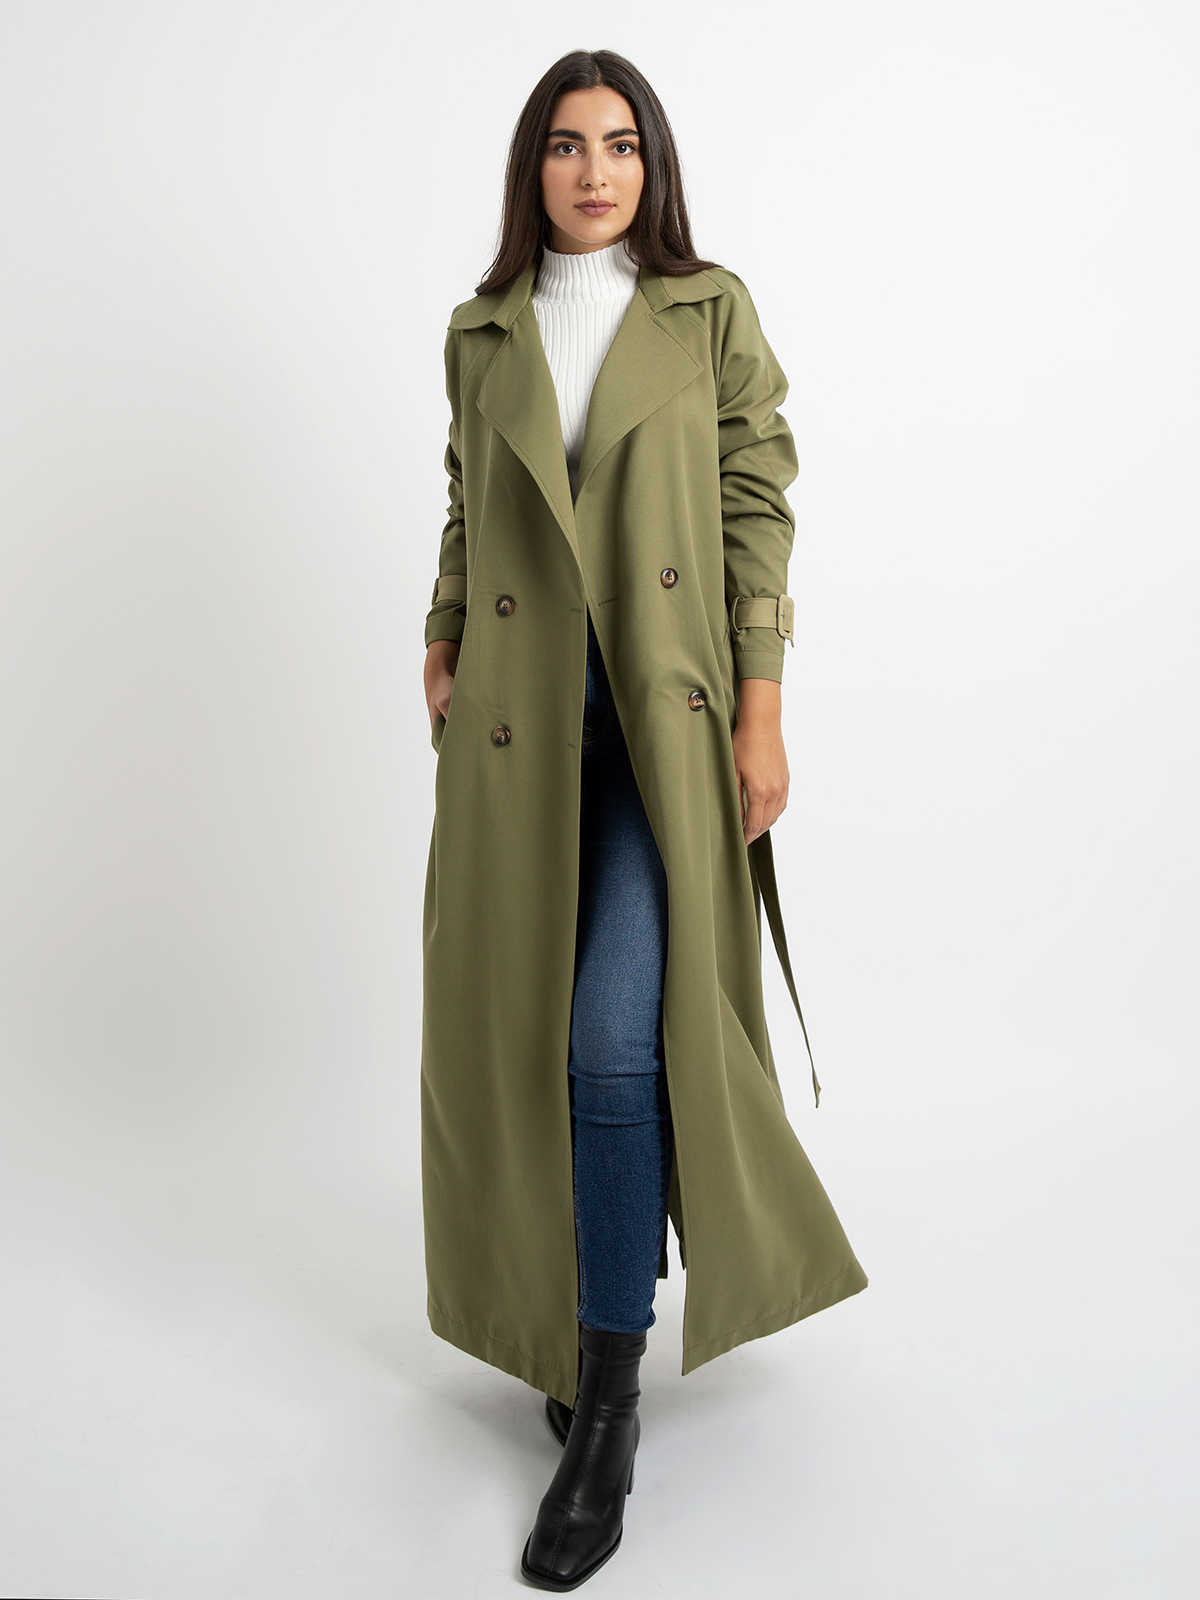 Kaafmeem women clothing regular fit green coat style long trench abaya for everyday in lyocell fabric for winter or travel 